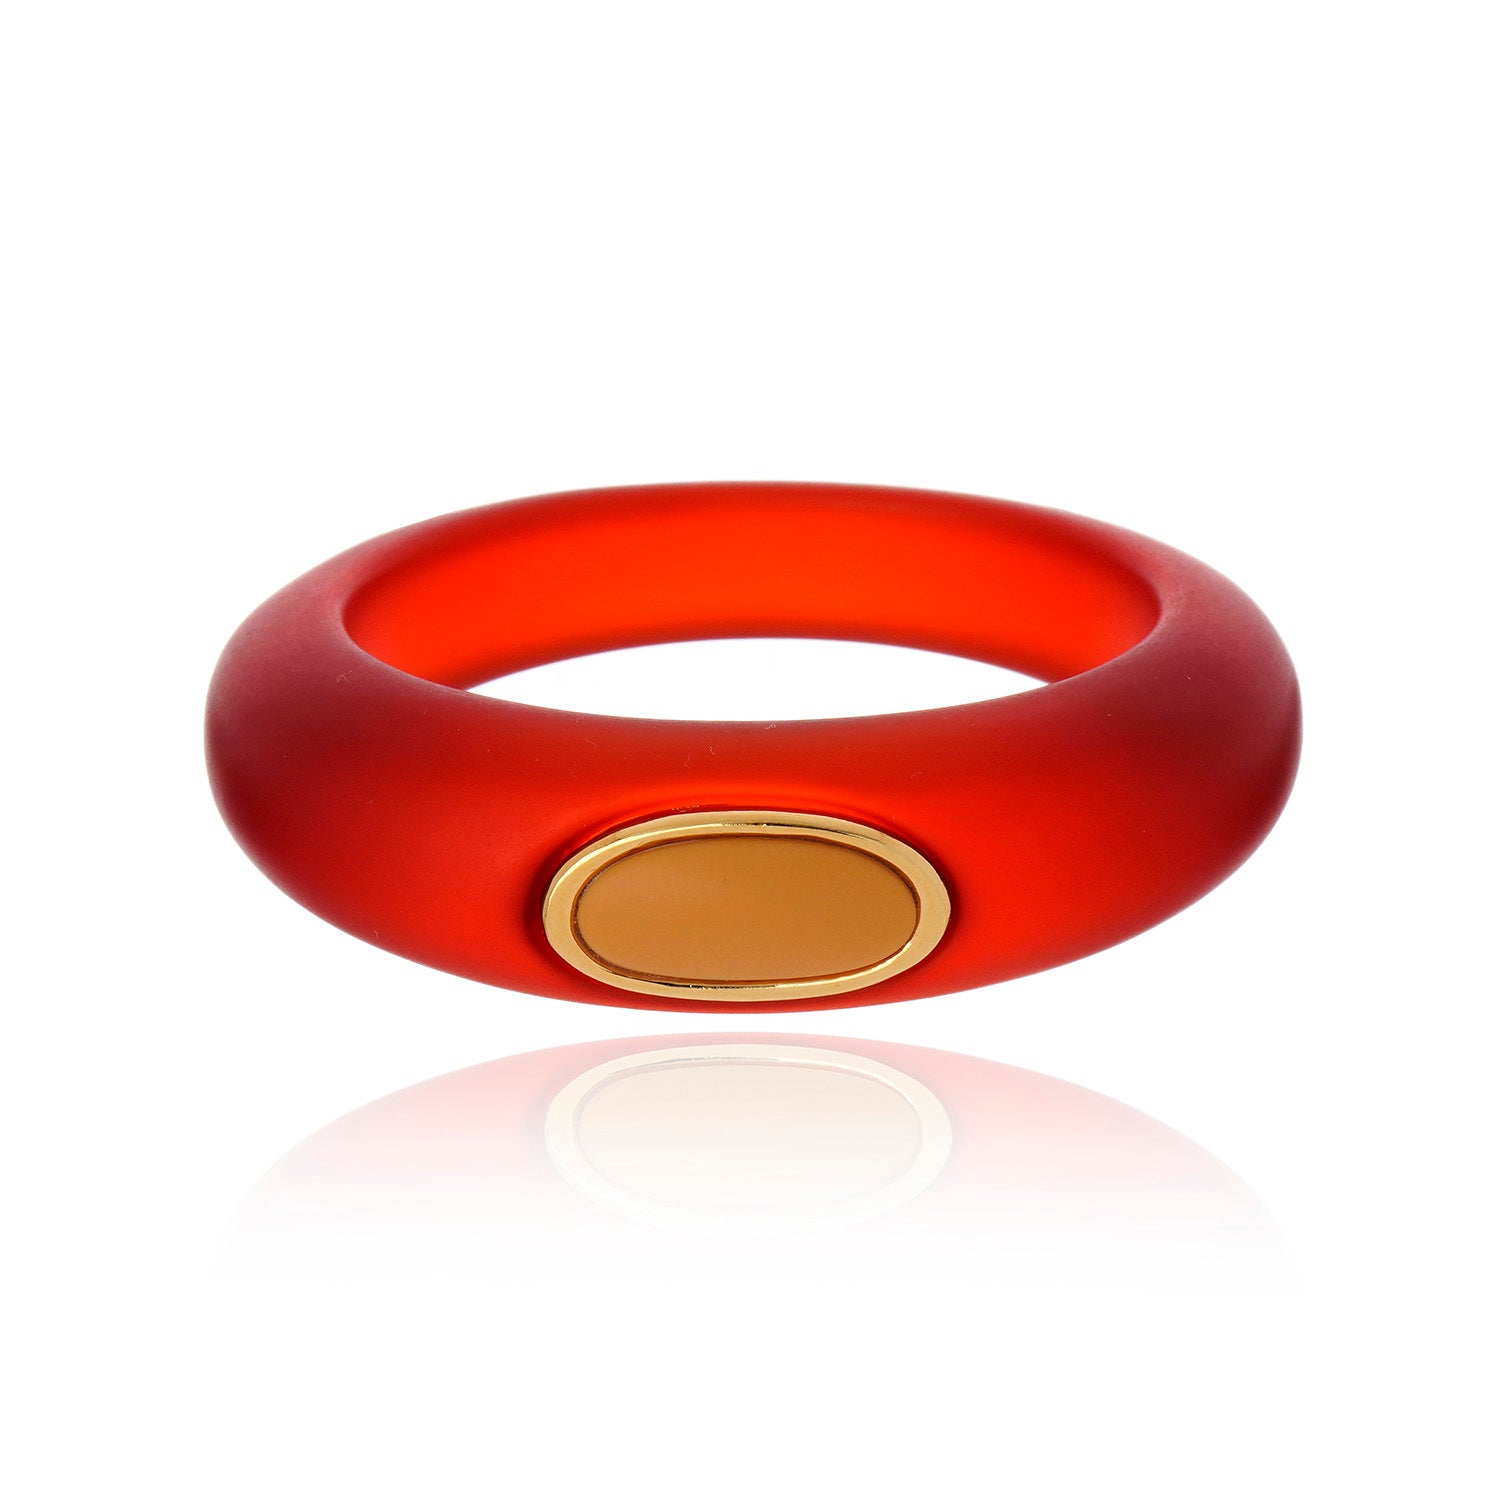 Resin Drop Bangle - Coral and Beige